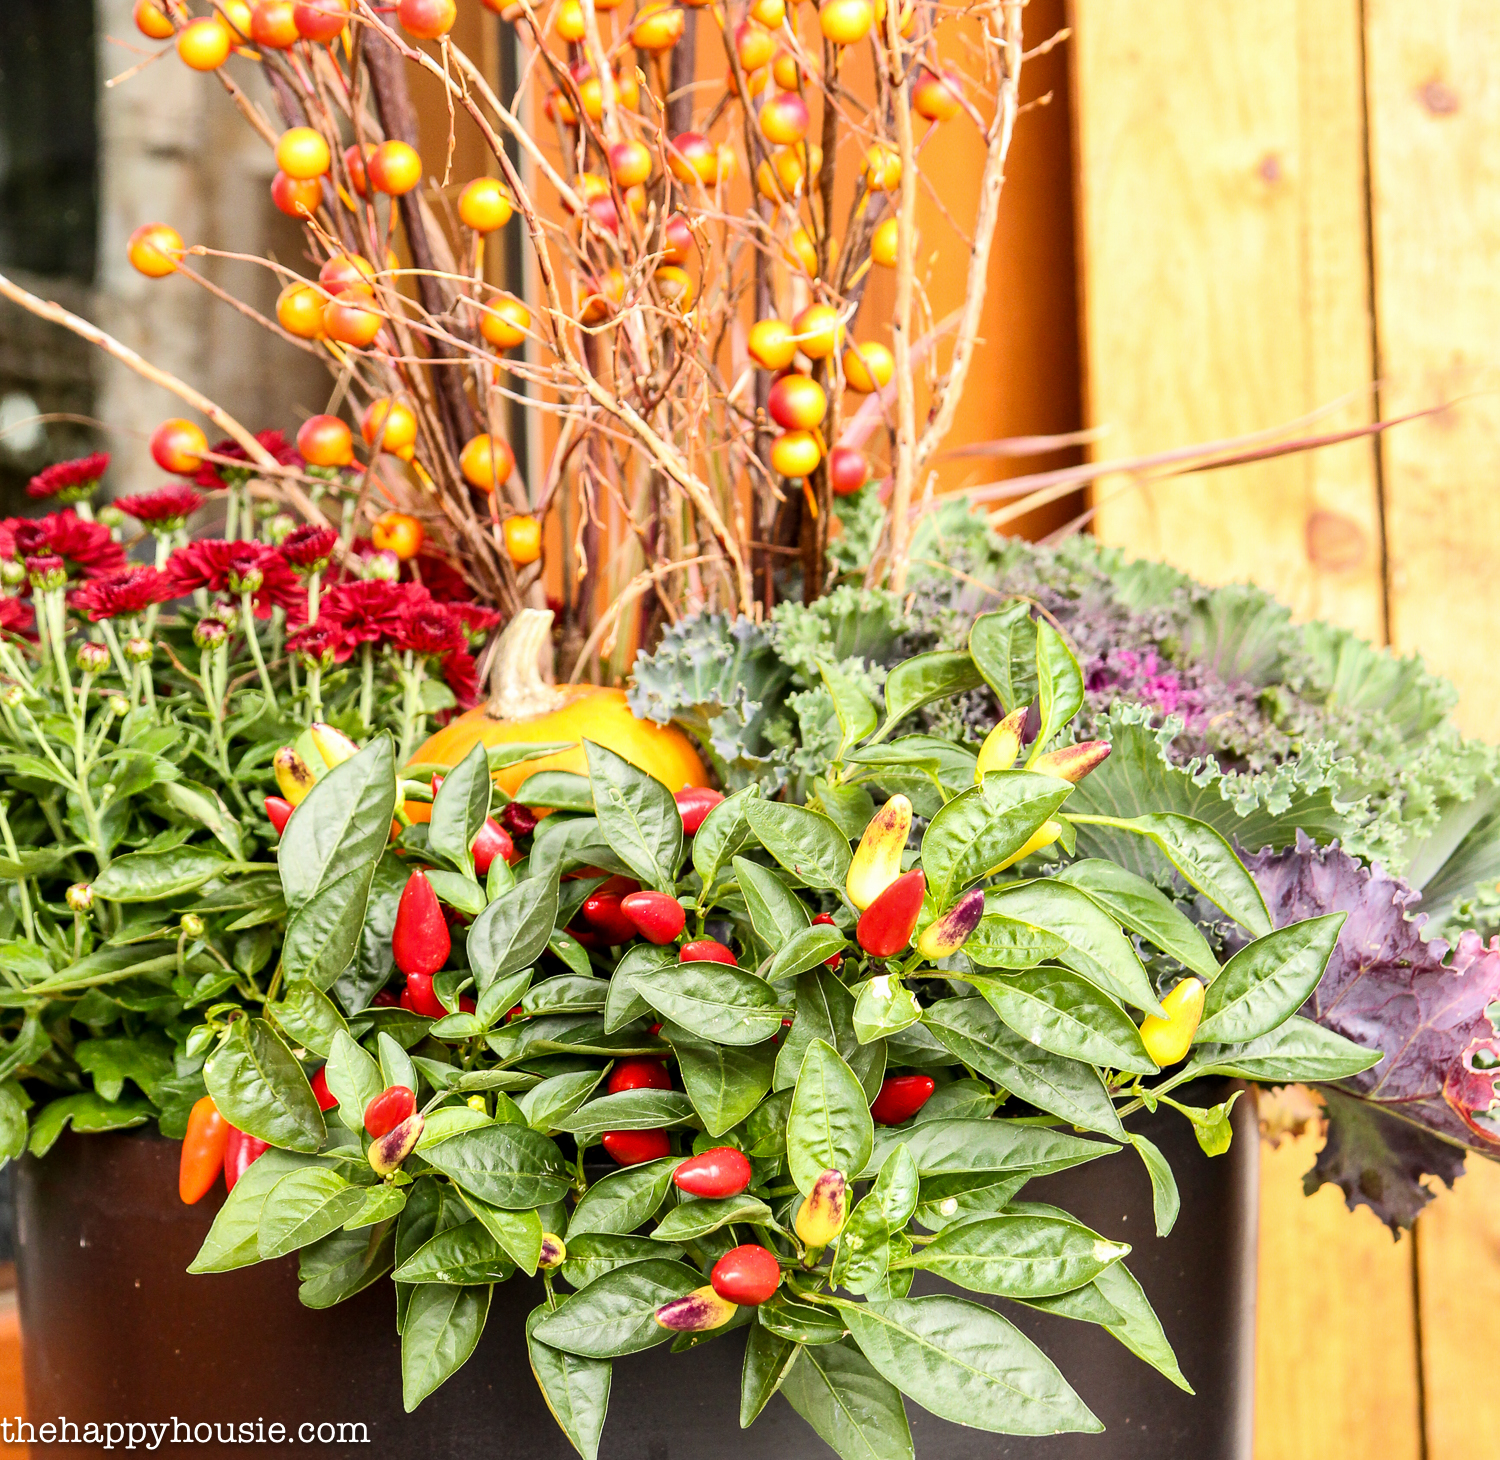 Up close of the red pepper plant, kale and red flowers in the planter.